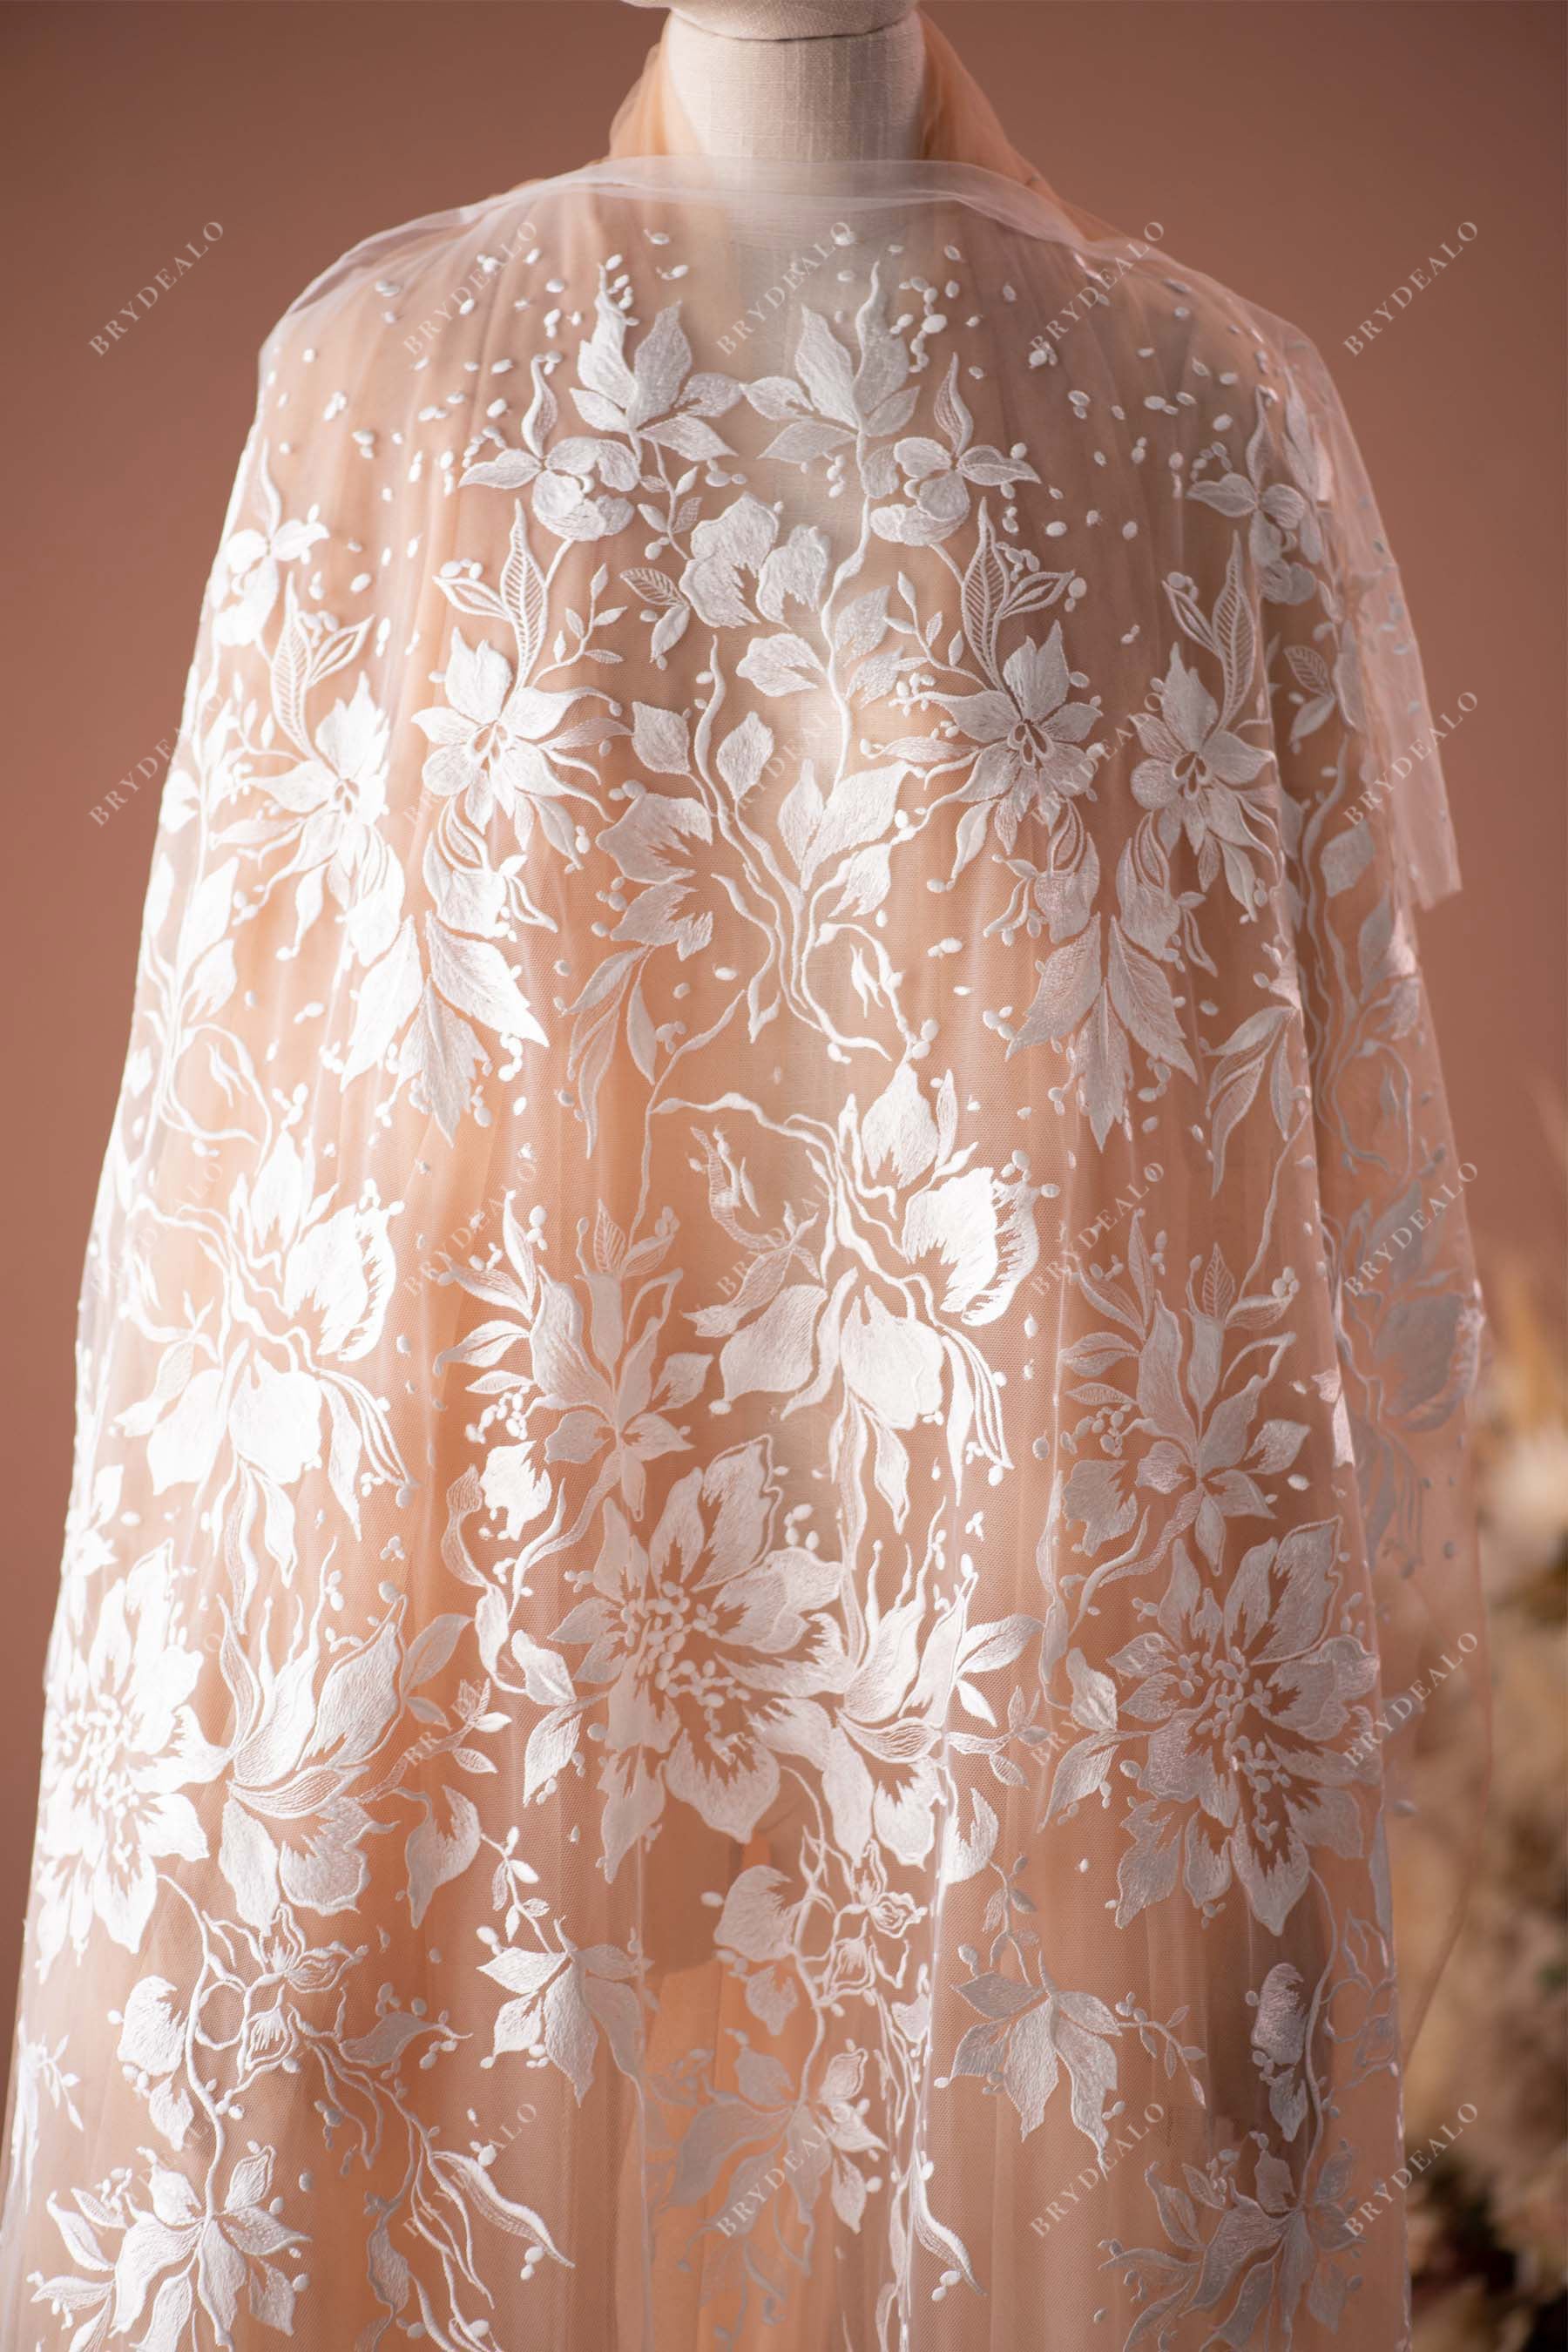 Designer Wild Flower Bridal Embroidery Lace Fabric for Dresses